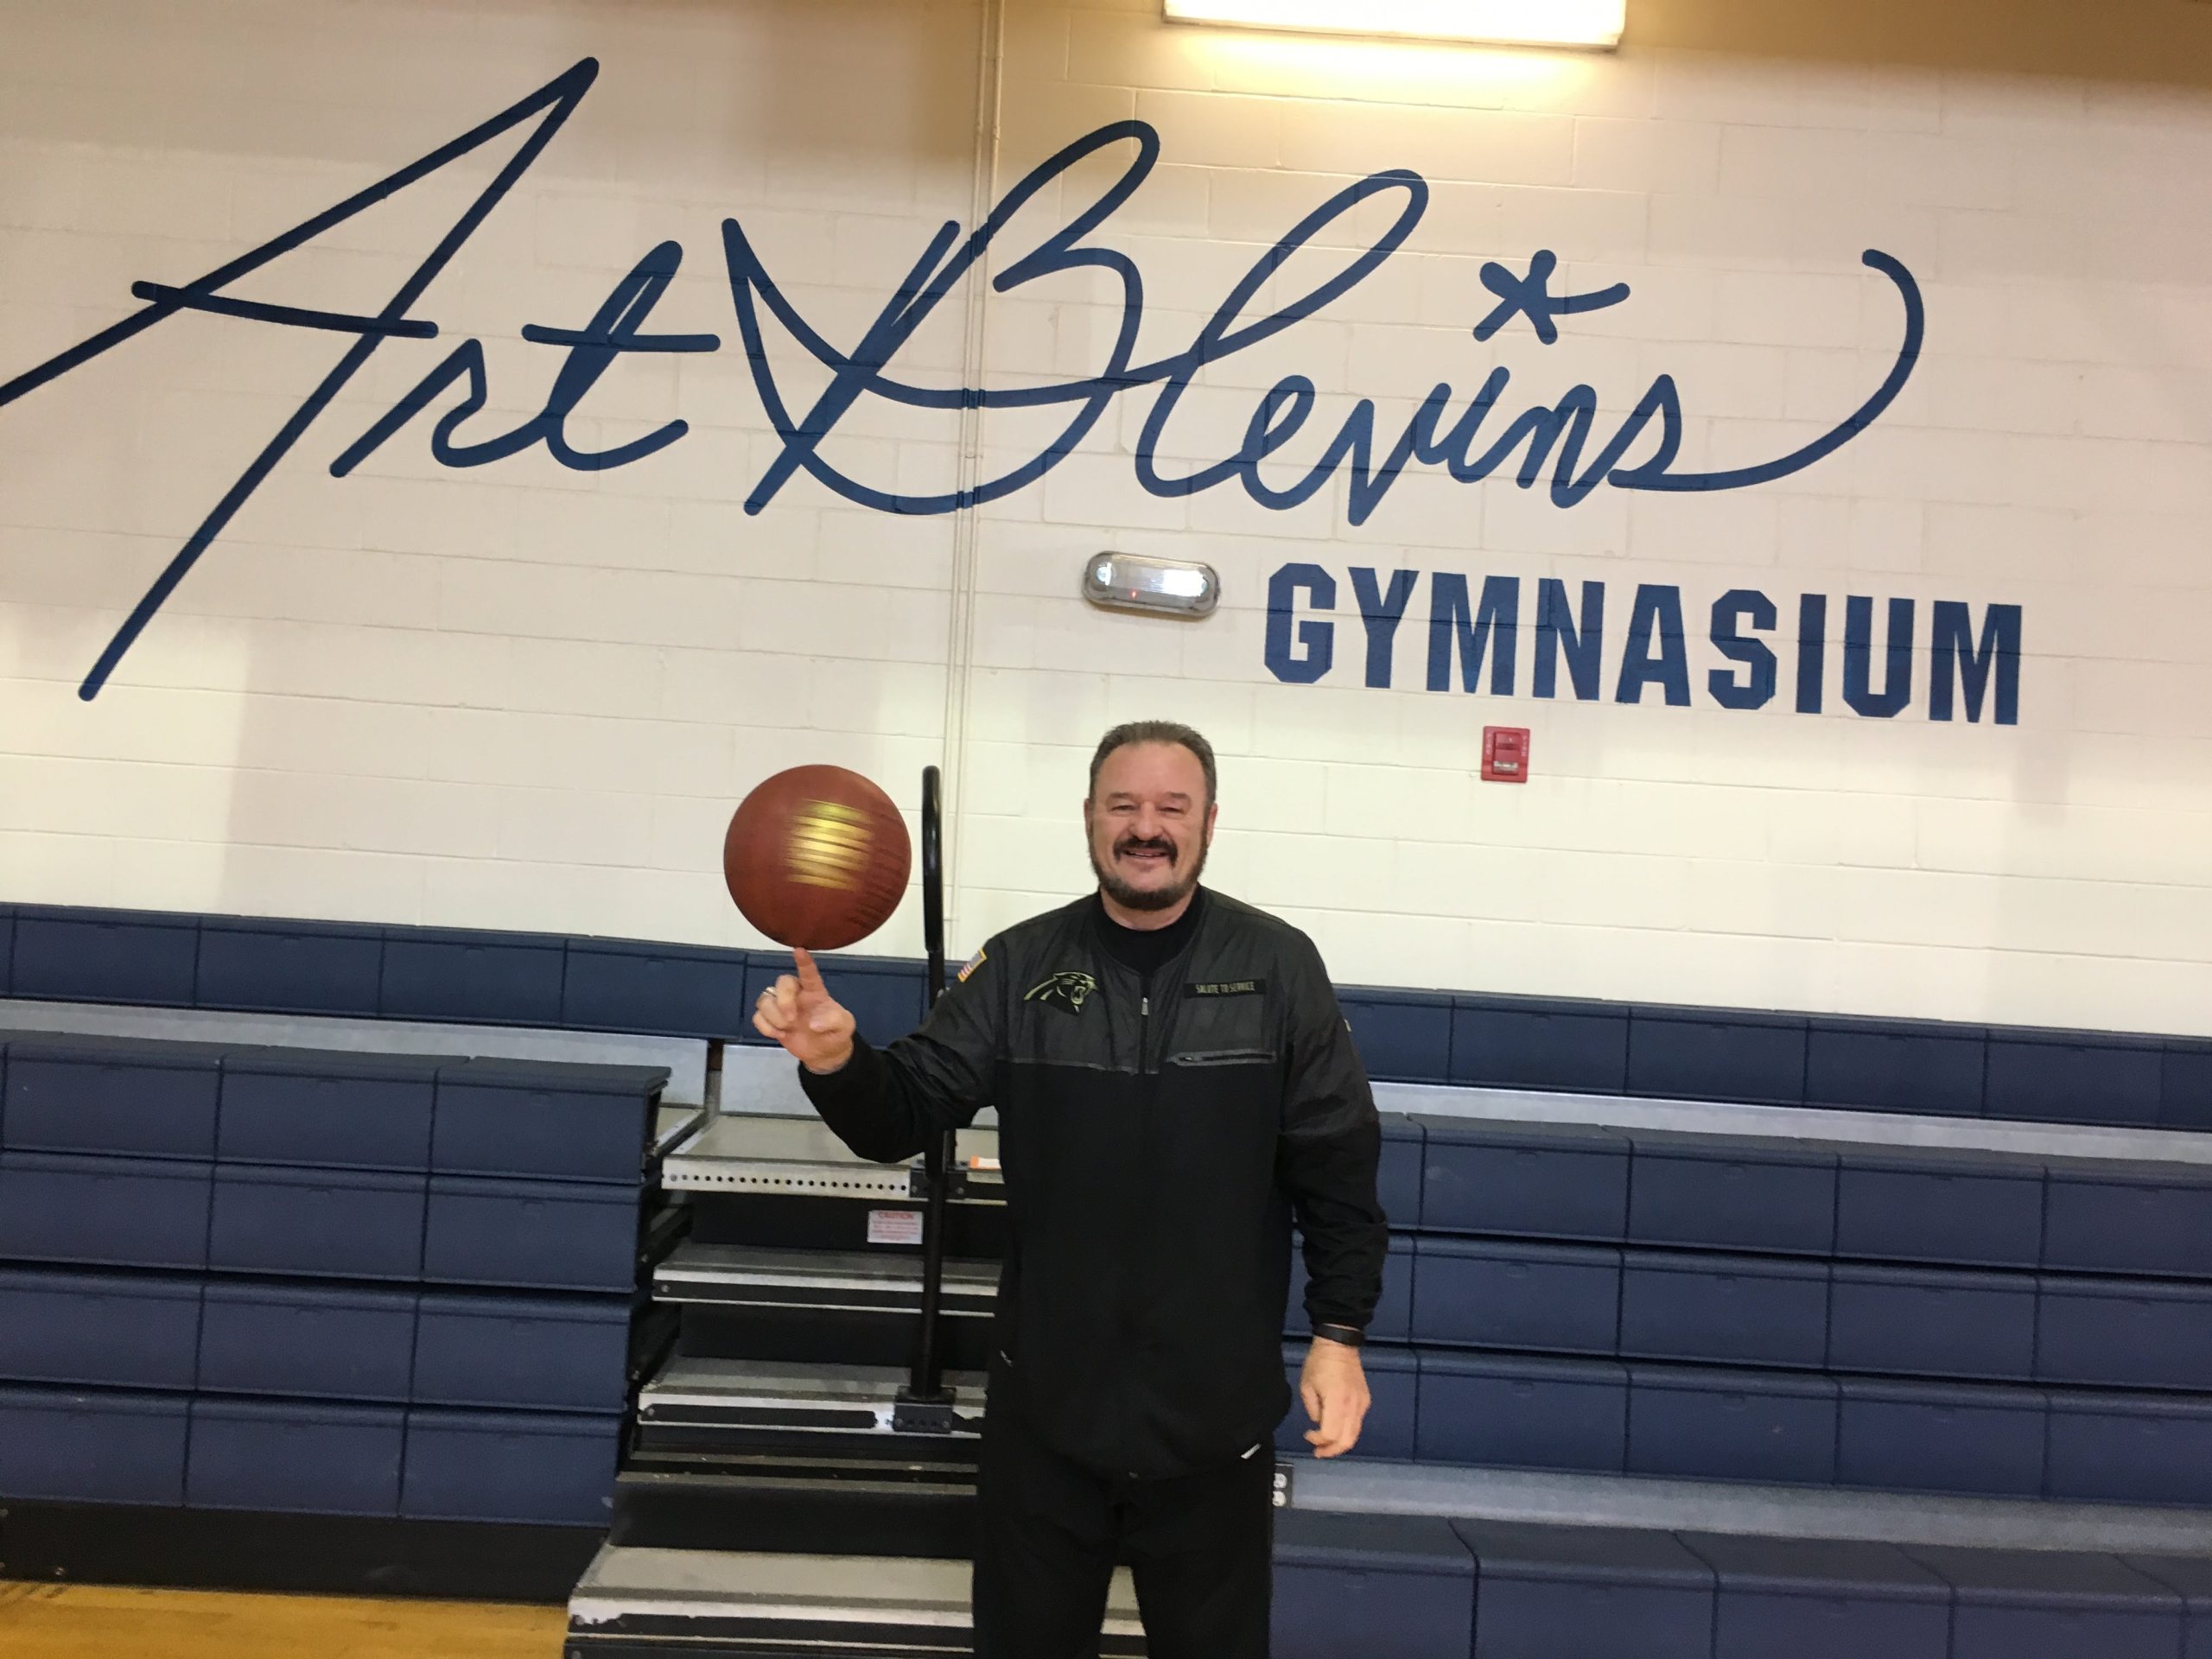 Bearded man spinning a basketball in a gym with "Art Blevins Gymnasium" painted in large letters on the wall behind him.